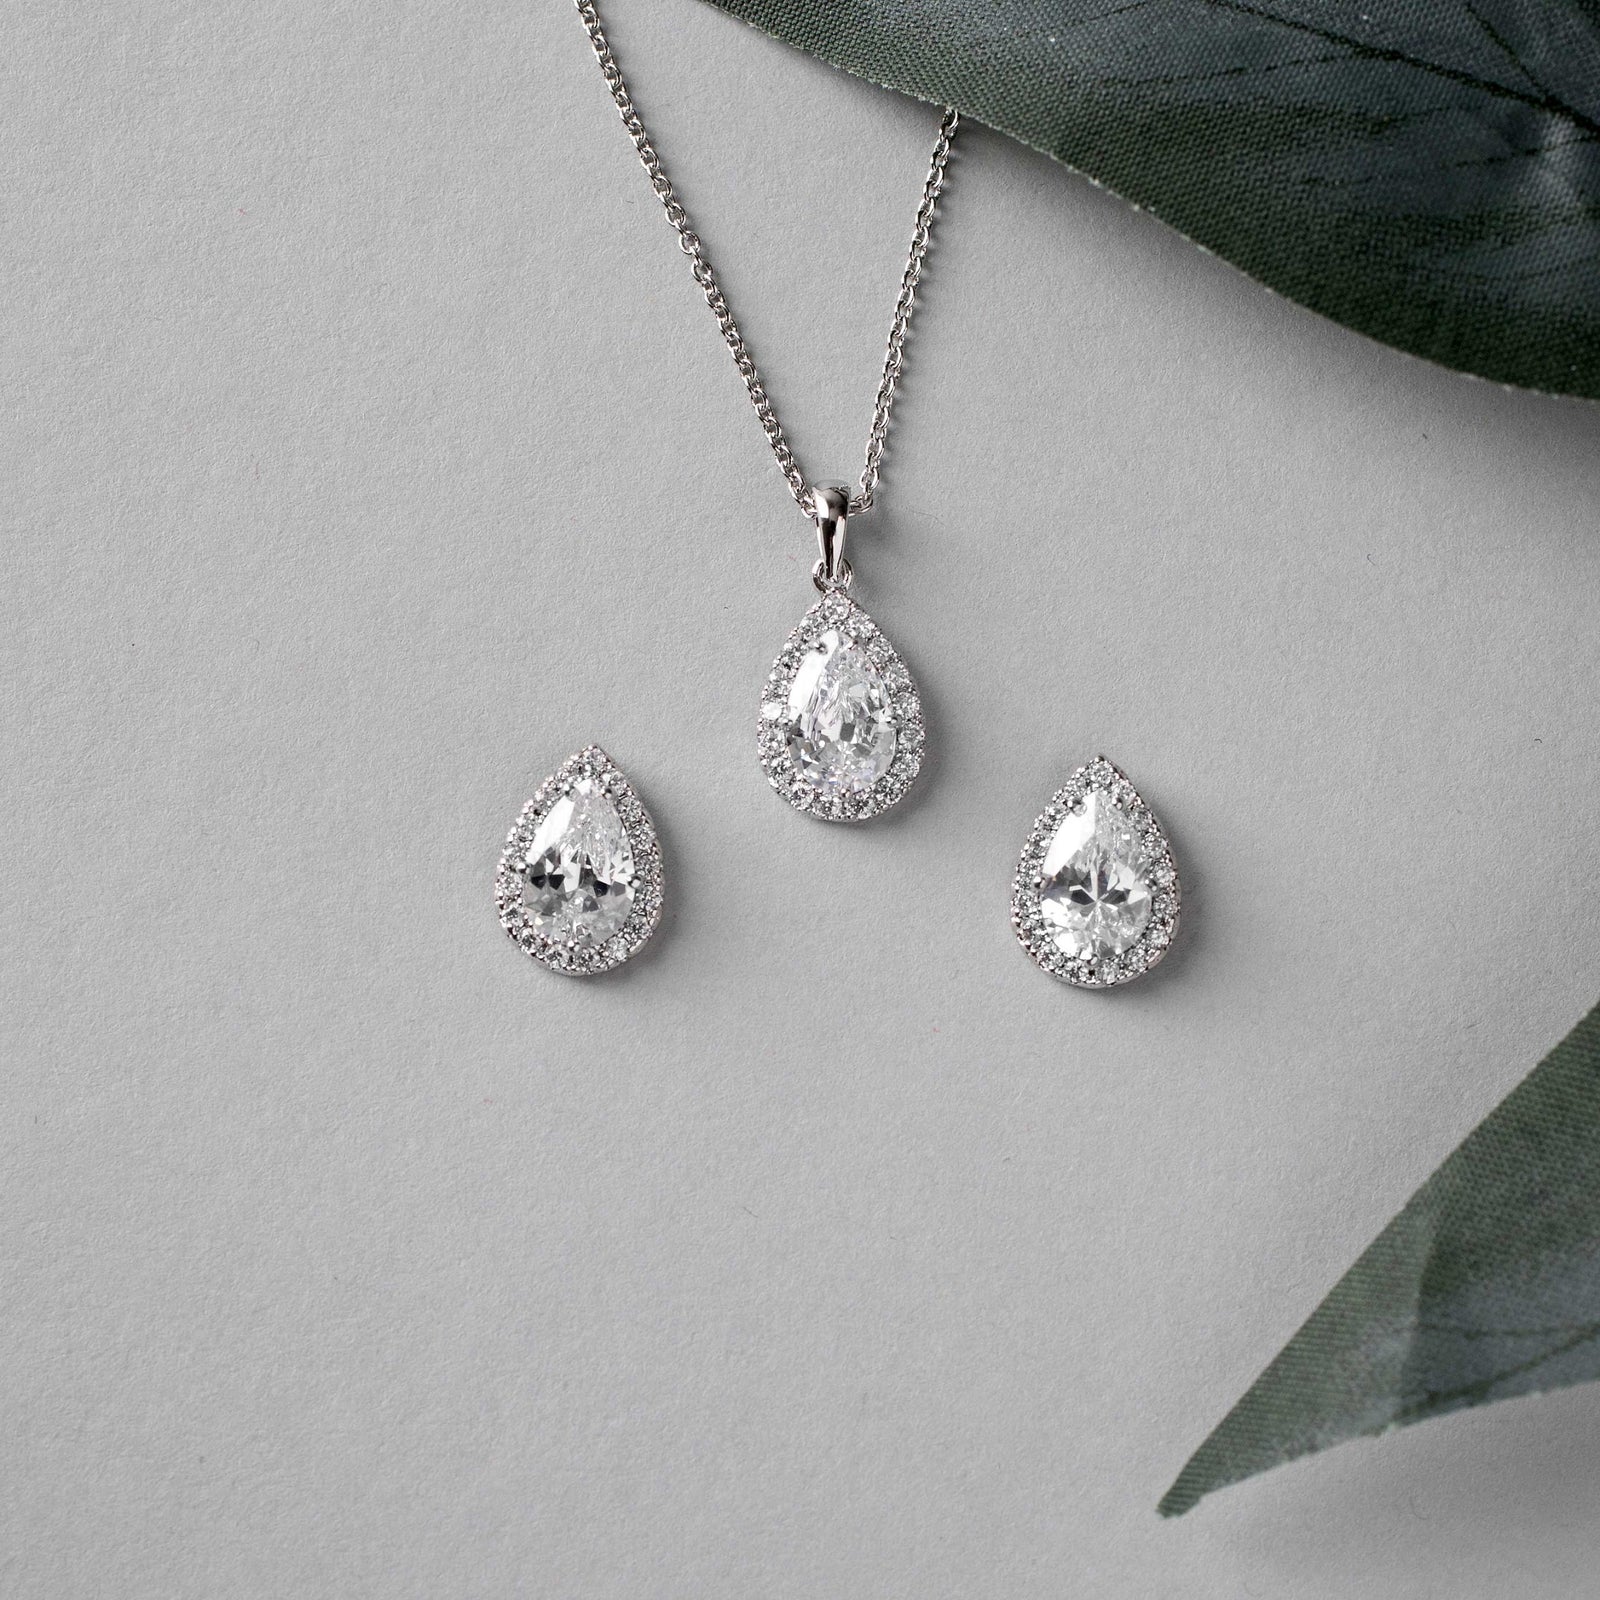 Classic CZ Necklace Pave Pear Pendant and Earrings